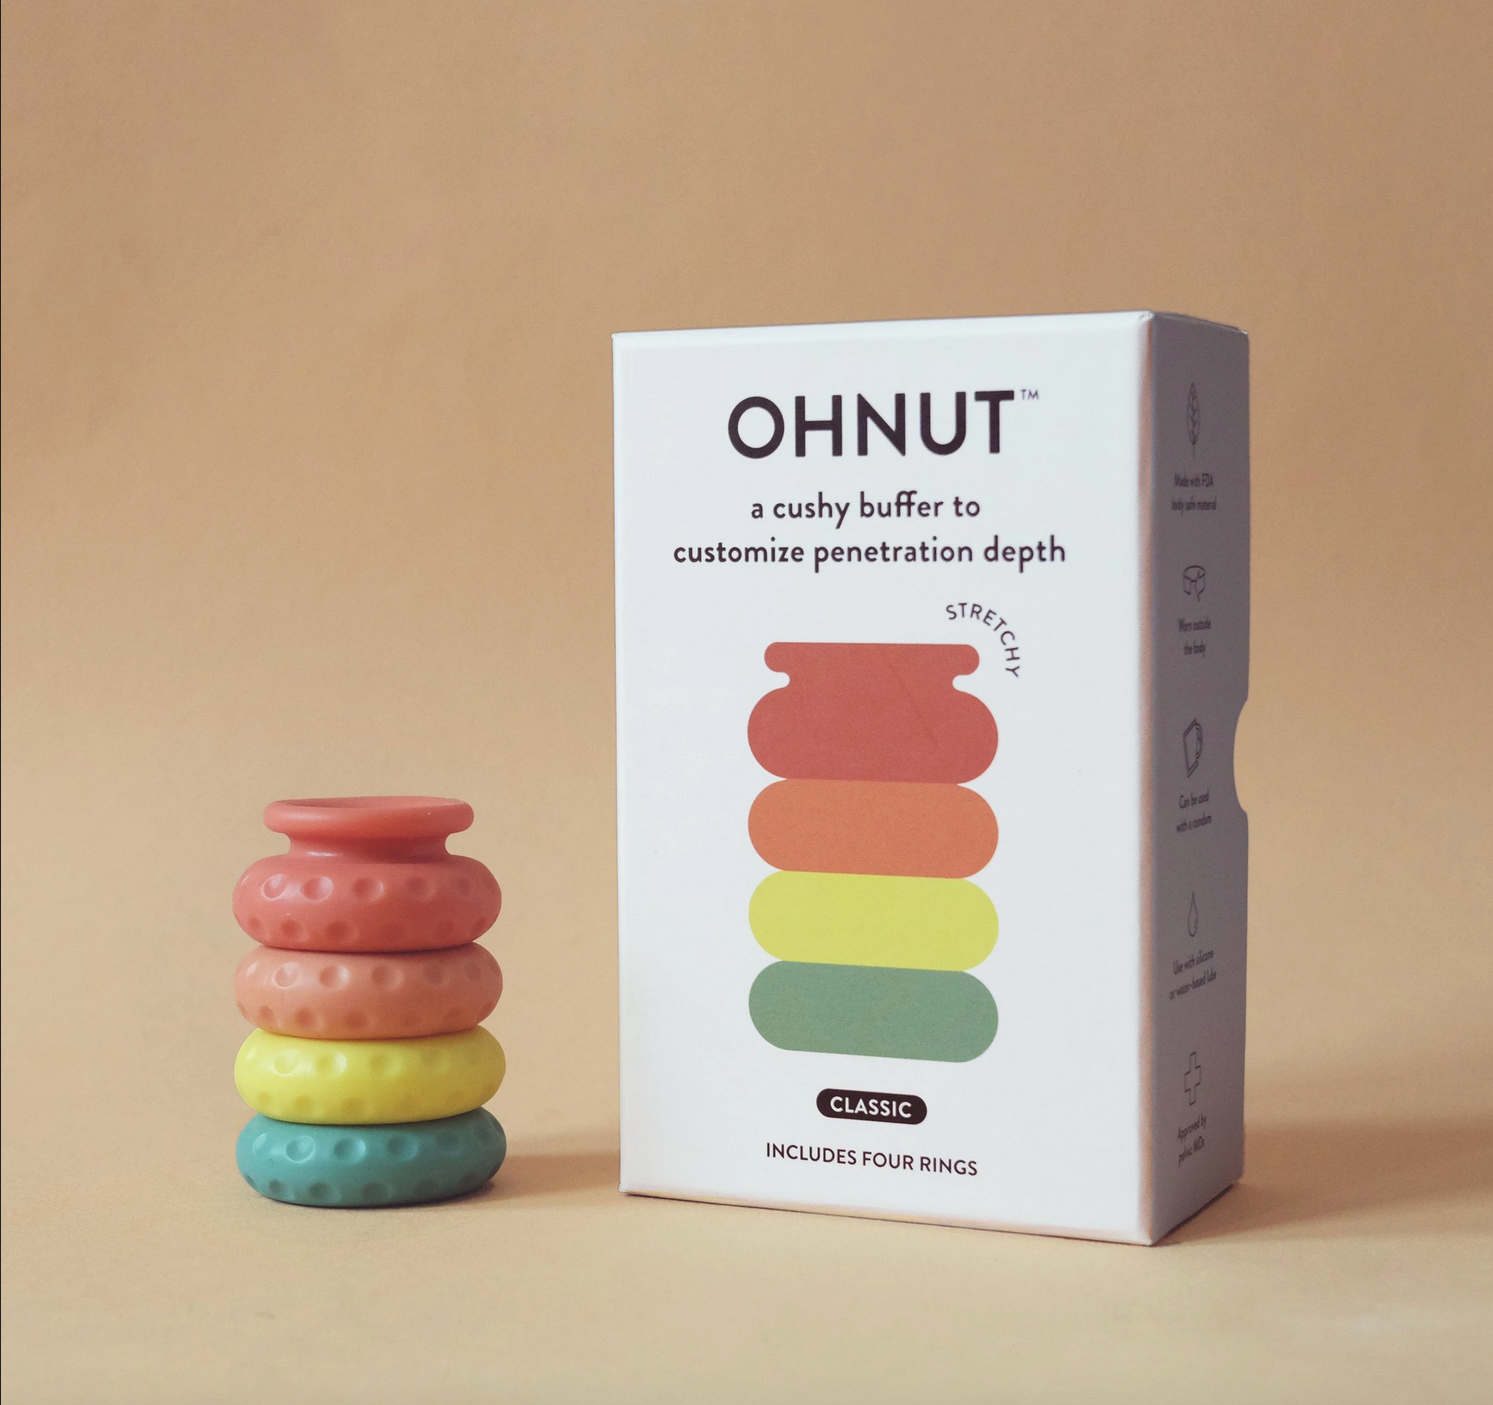 Ohnut Penetration Buffer Rings RAINBOW Classic and Wide 4-pack - ONNA